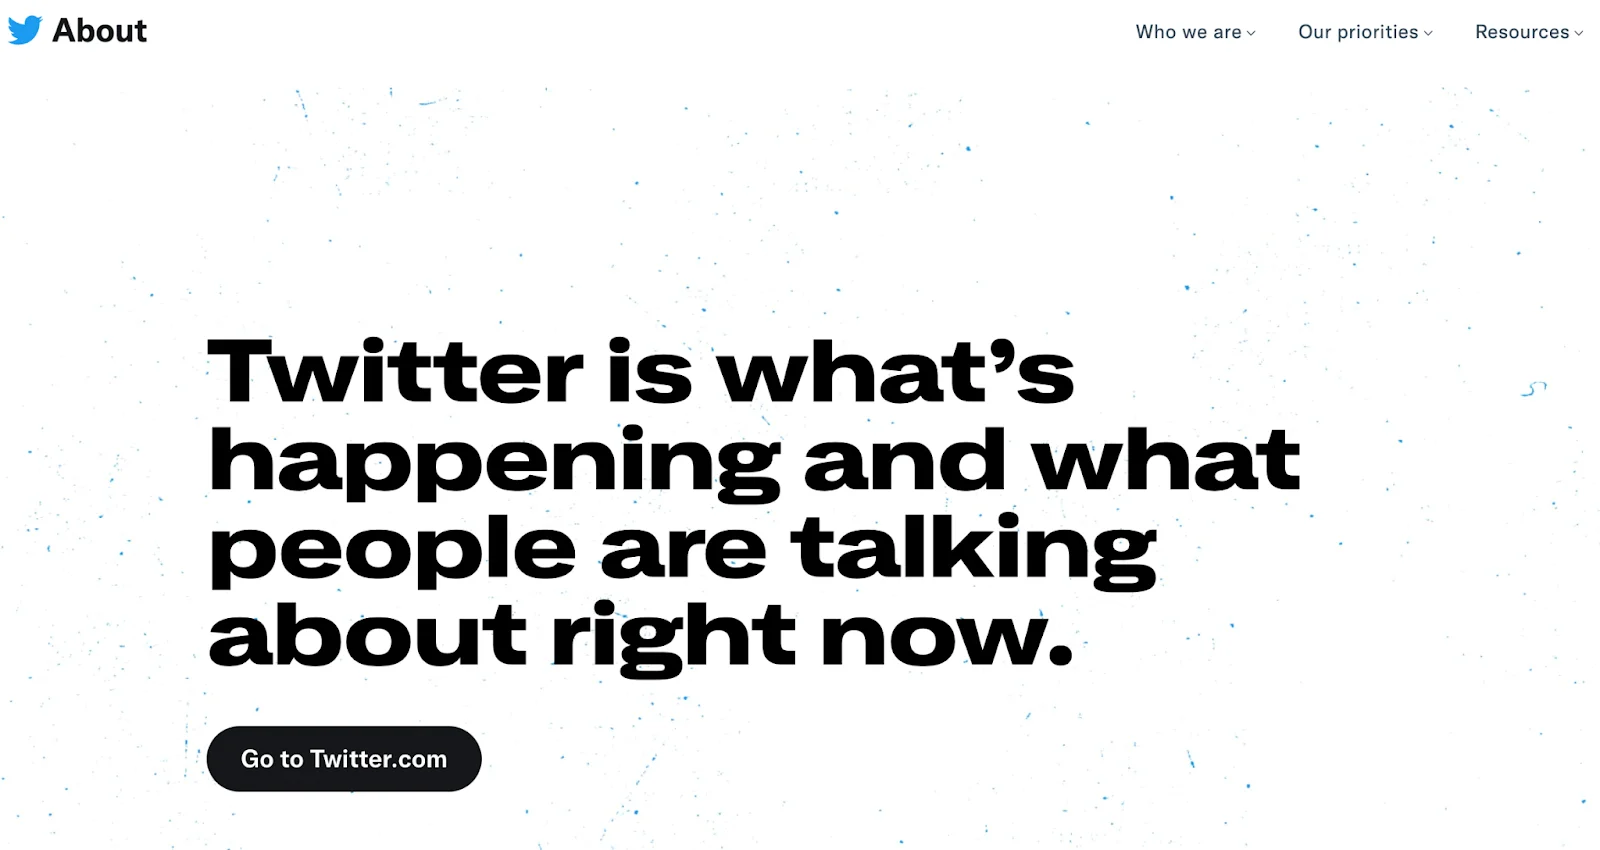 Screenshot from Twitter saying Twitter is what's happening now